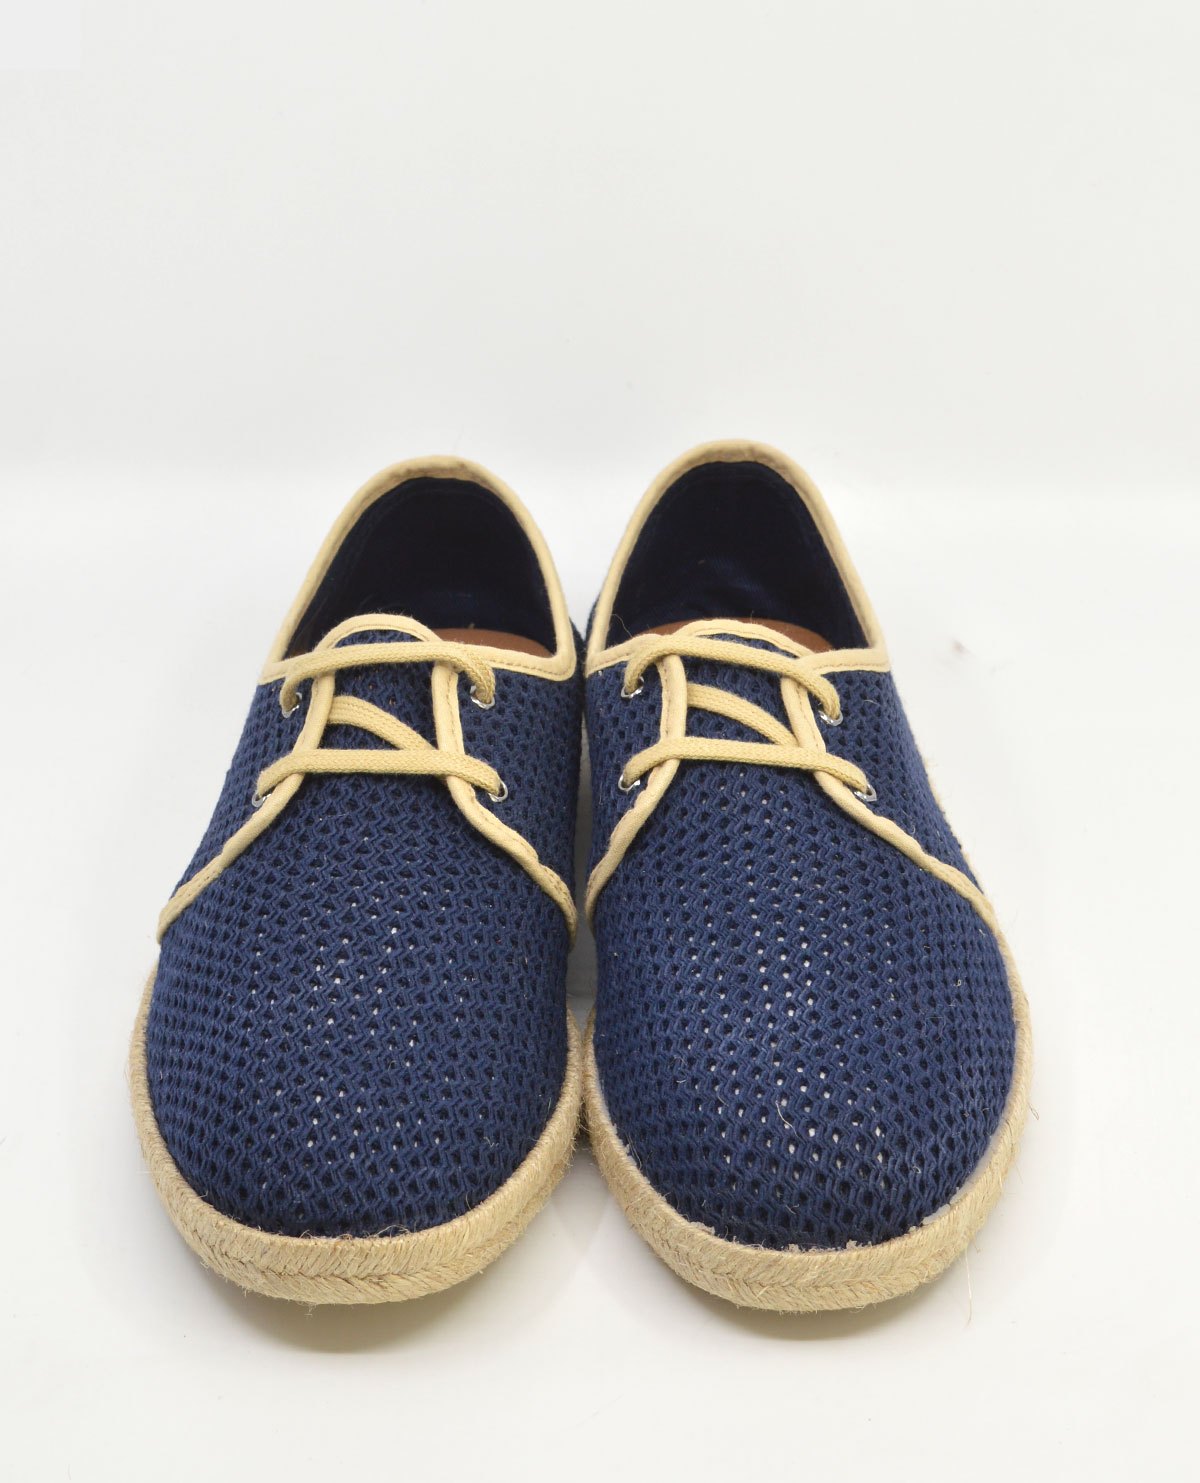 The Paulo Navy Cream Canvas – Summer Shoes – Mod Shoes